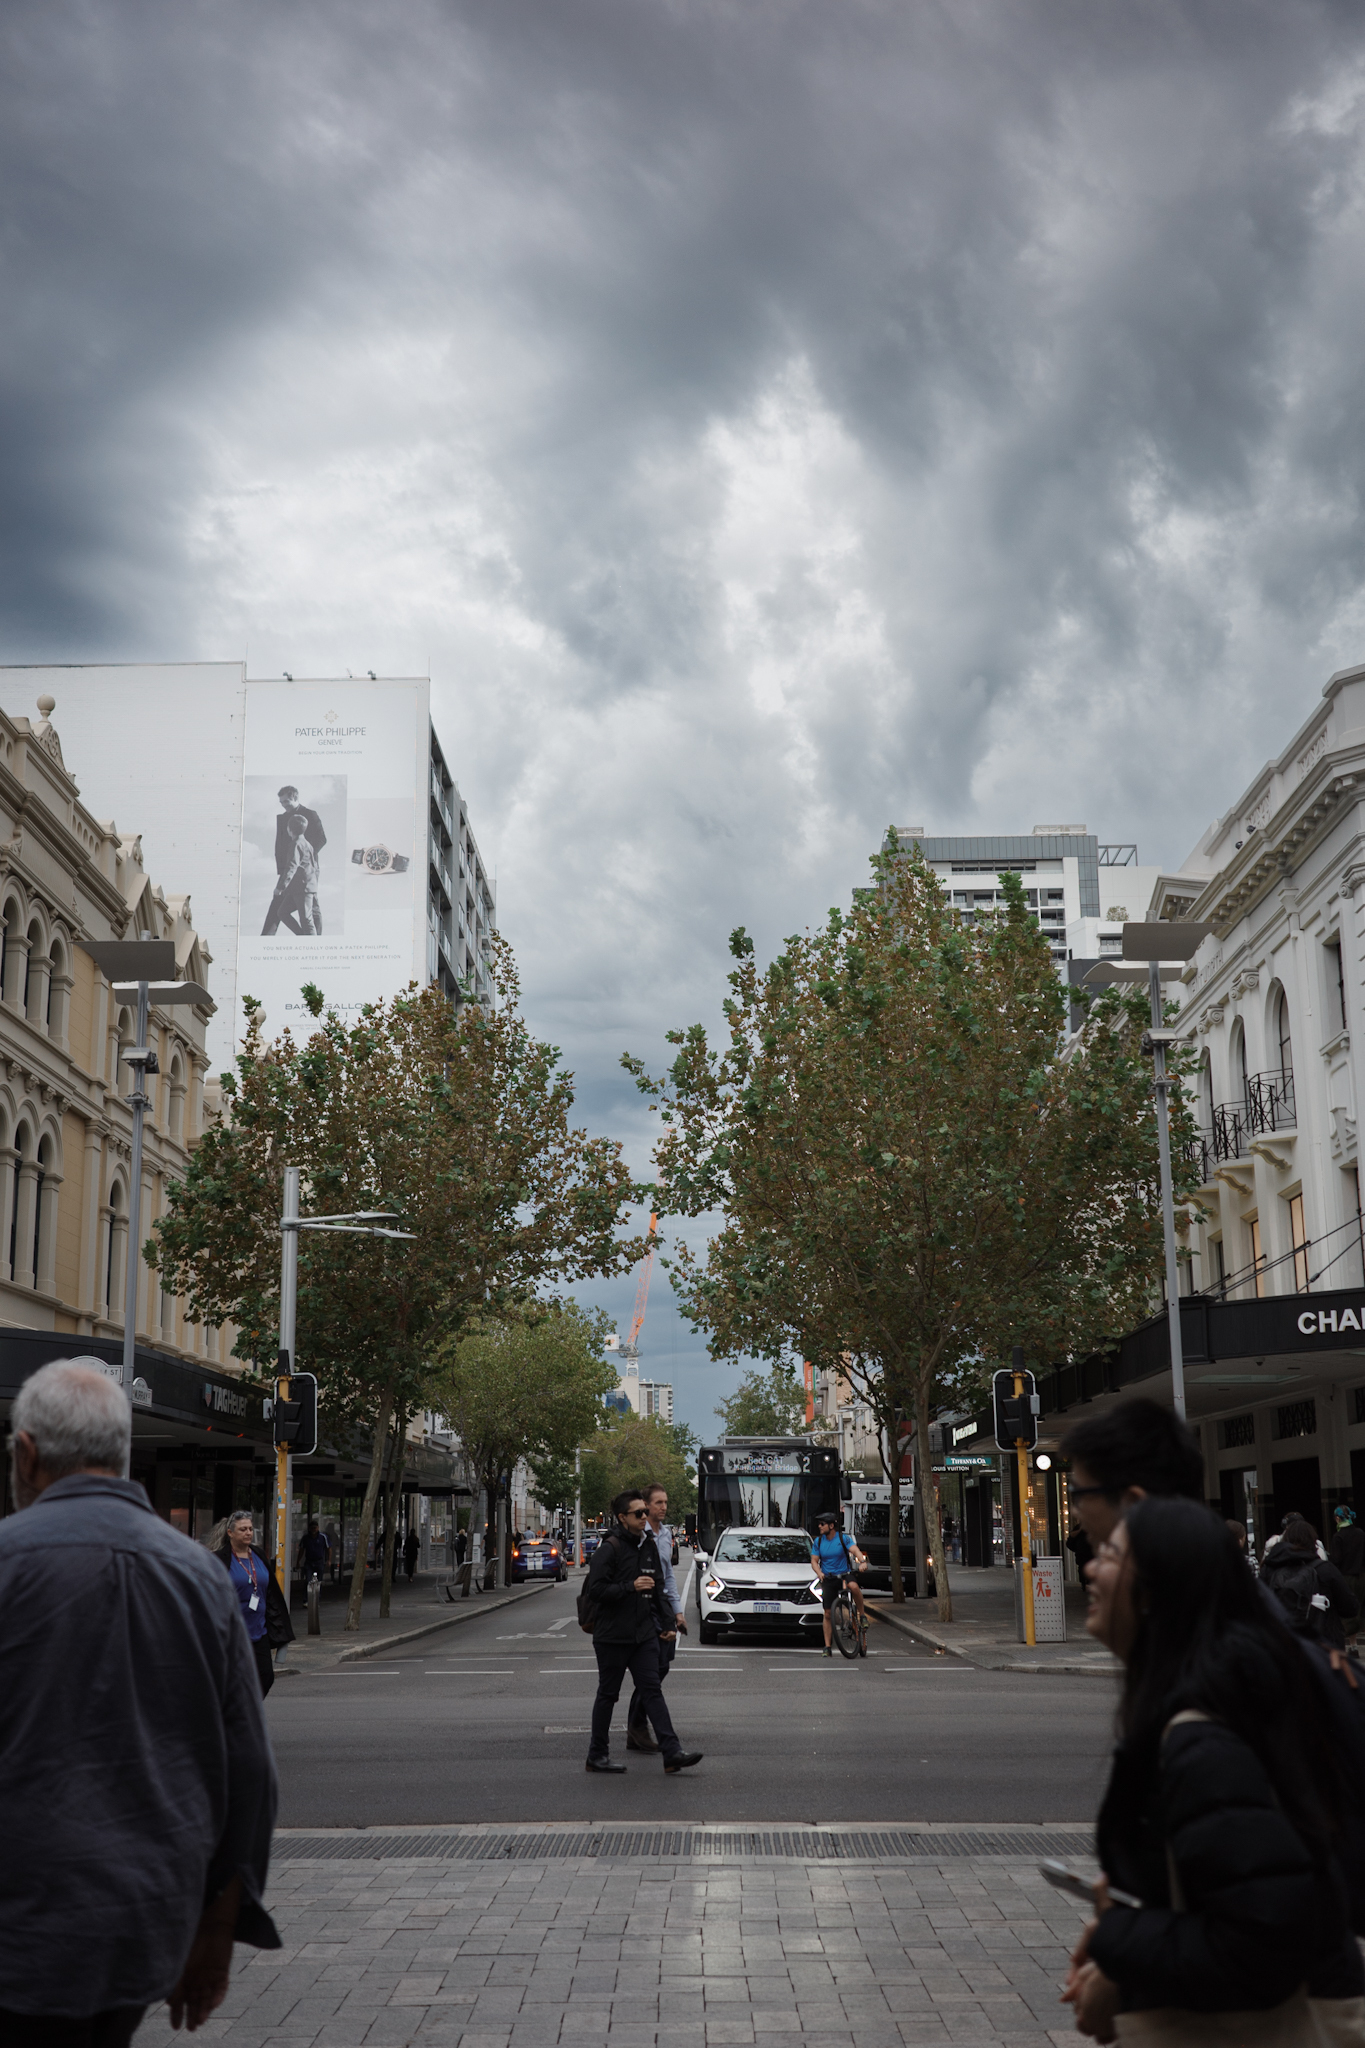 Auto-generated description: A cloudy sky looms over an urban street scene with pedestrians, trees, and classic architecture intermingling with modern signage.